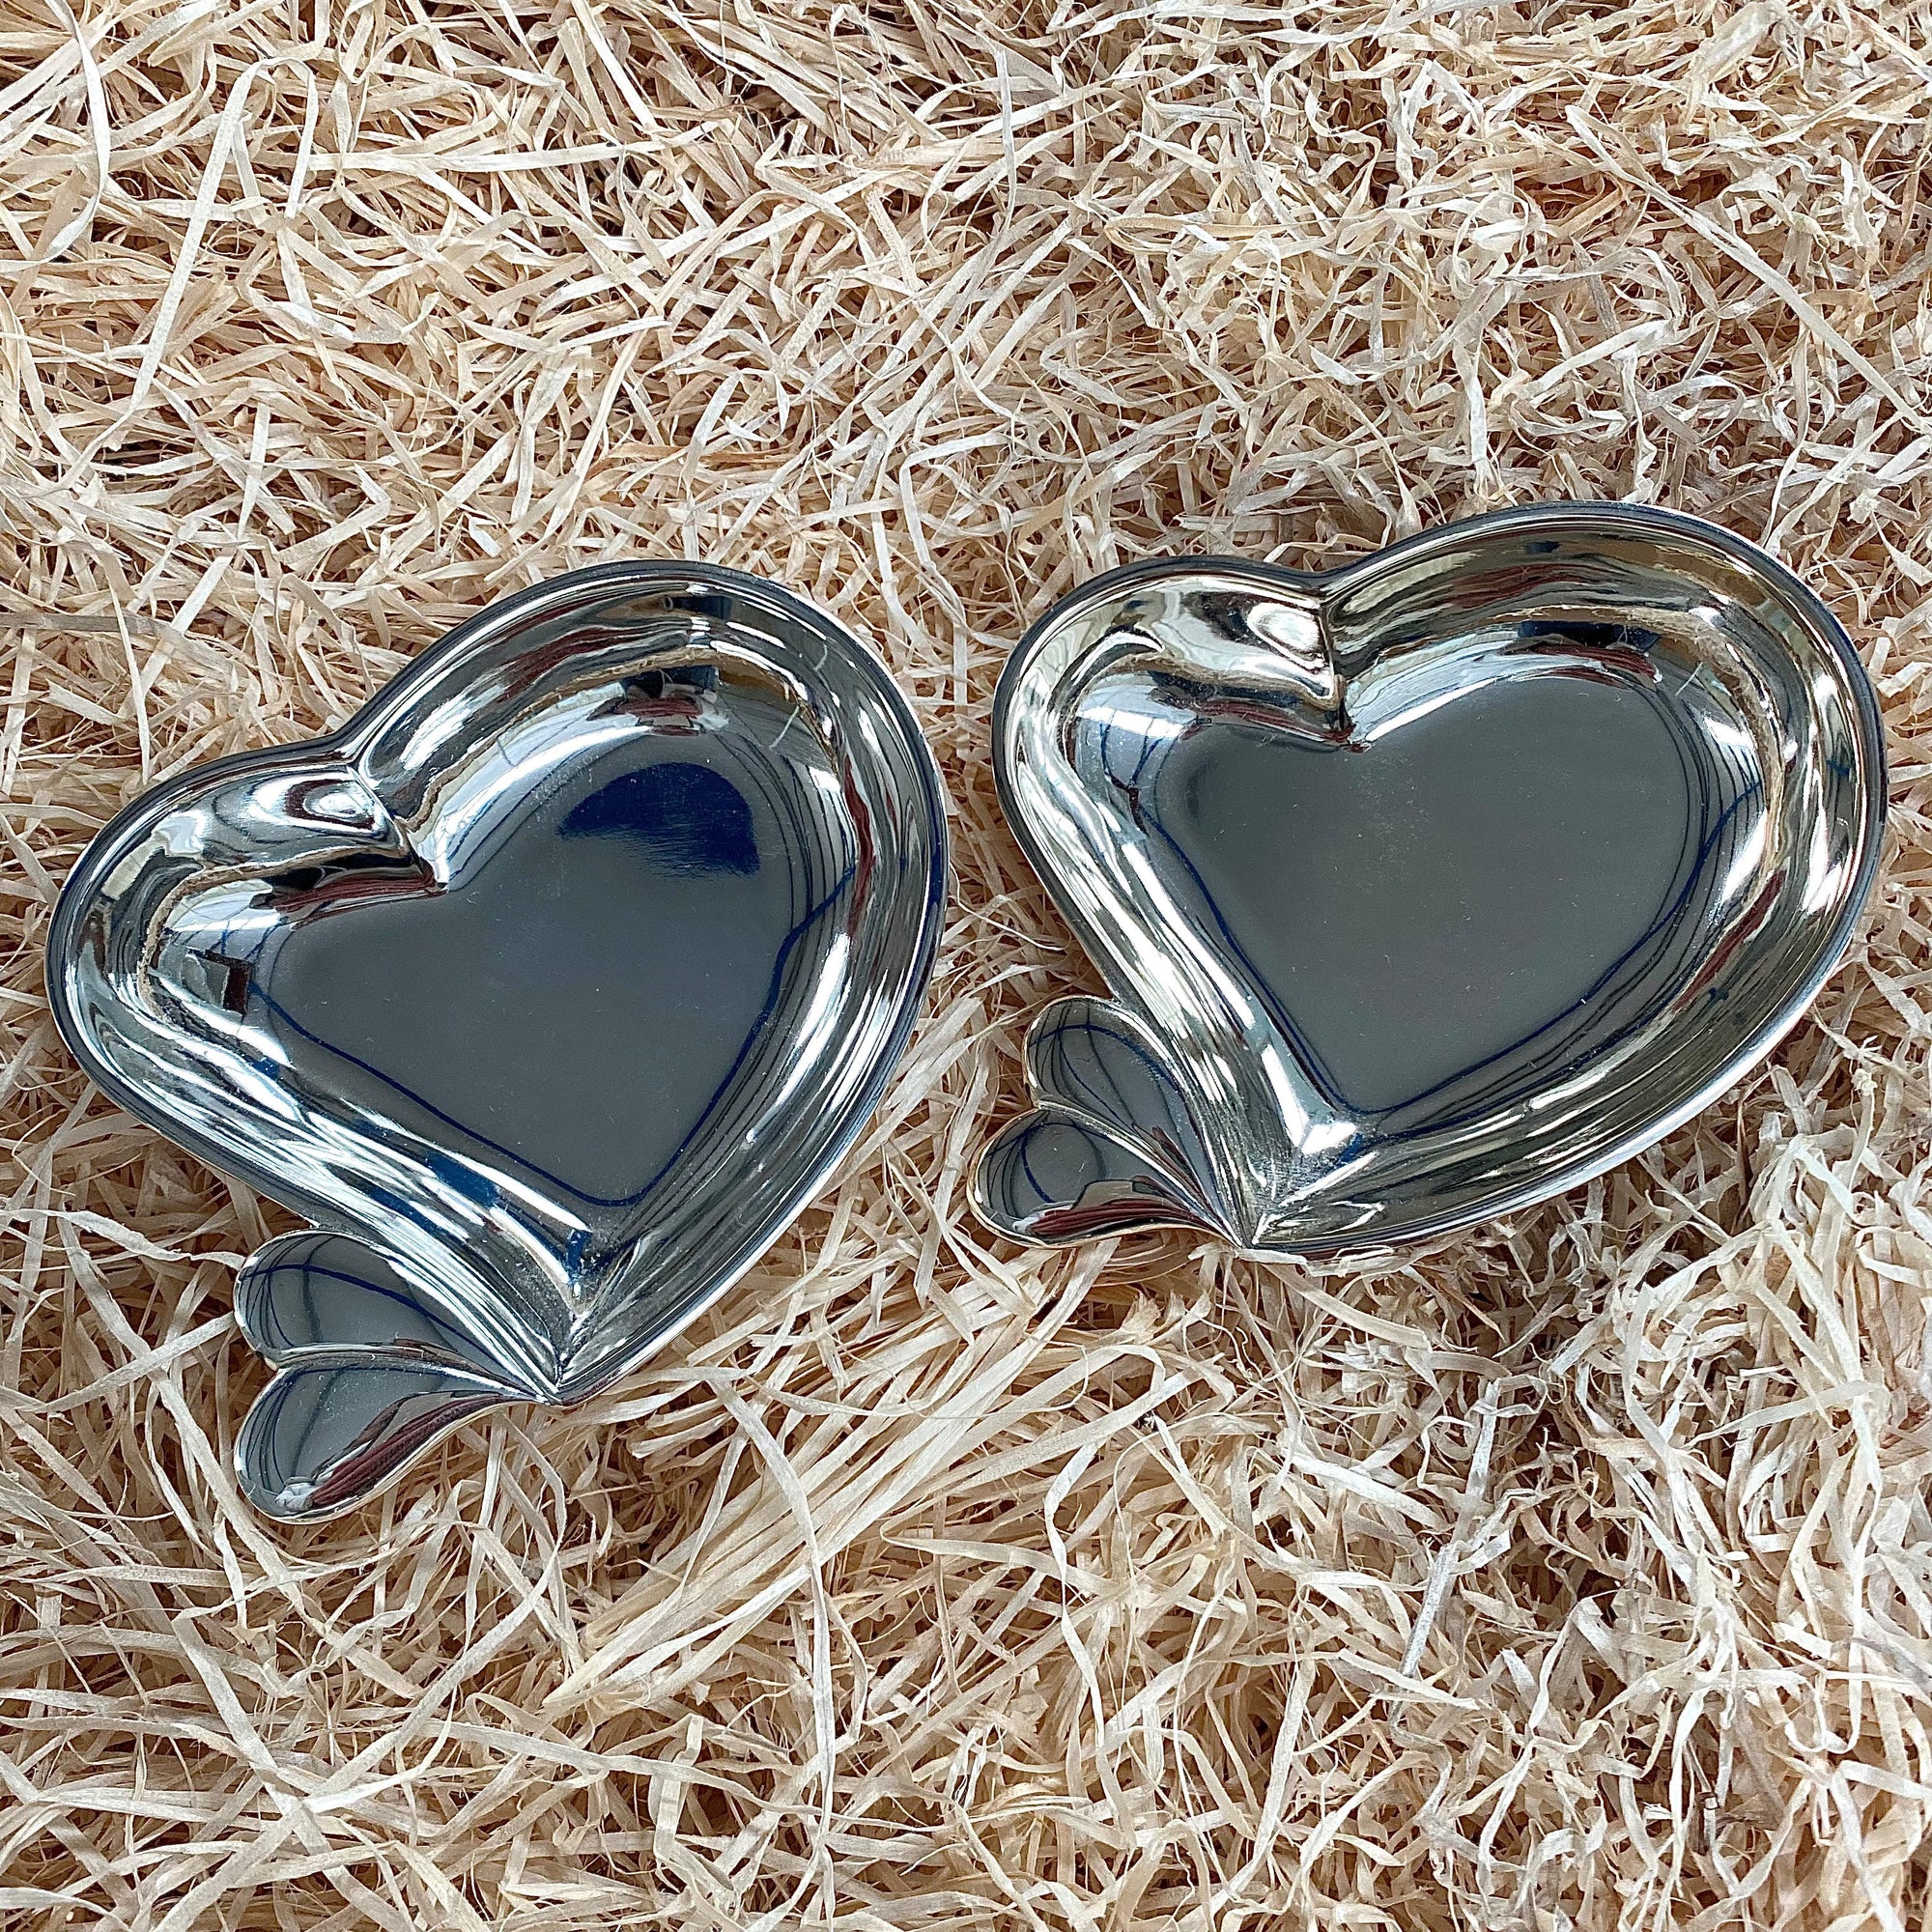 A pair of heart dishes